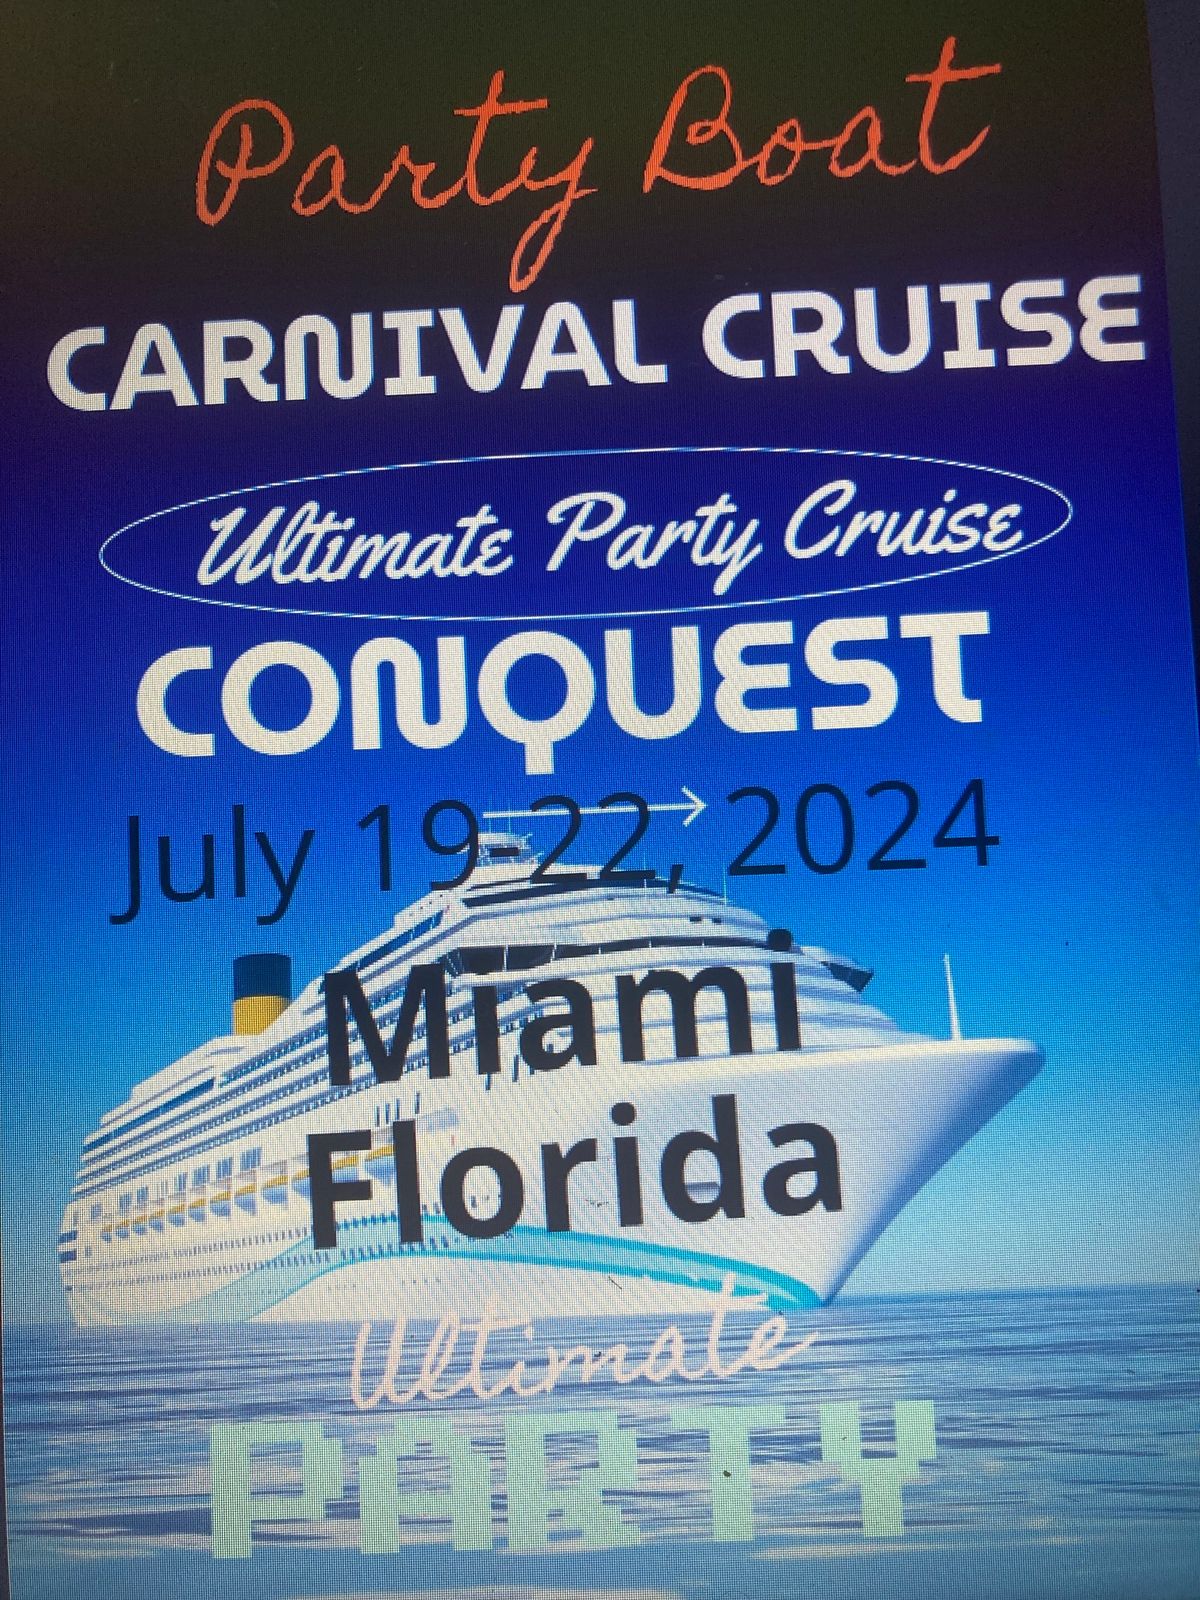 Carnival Conquest Ultimate Party Cruise